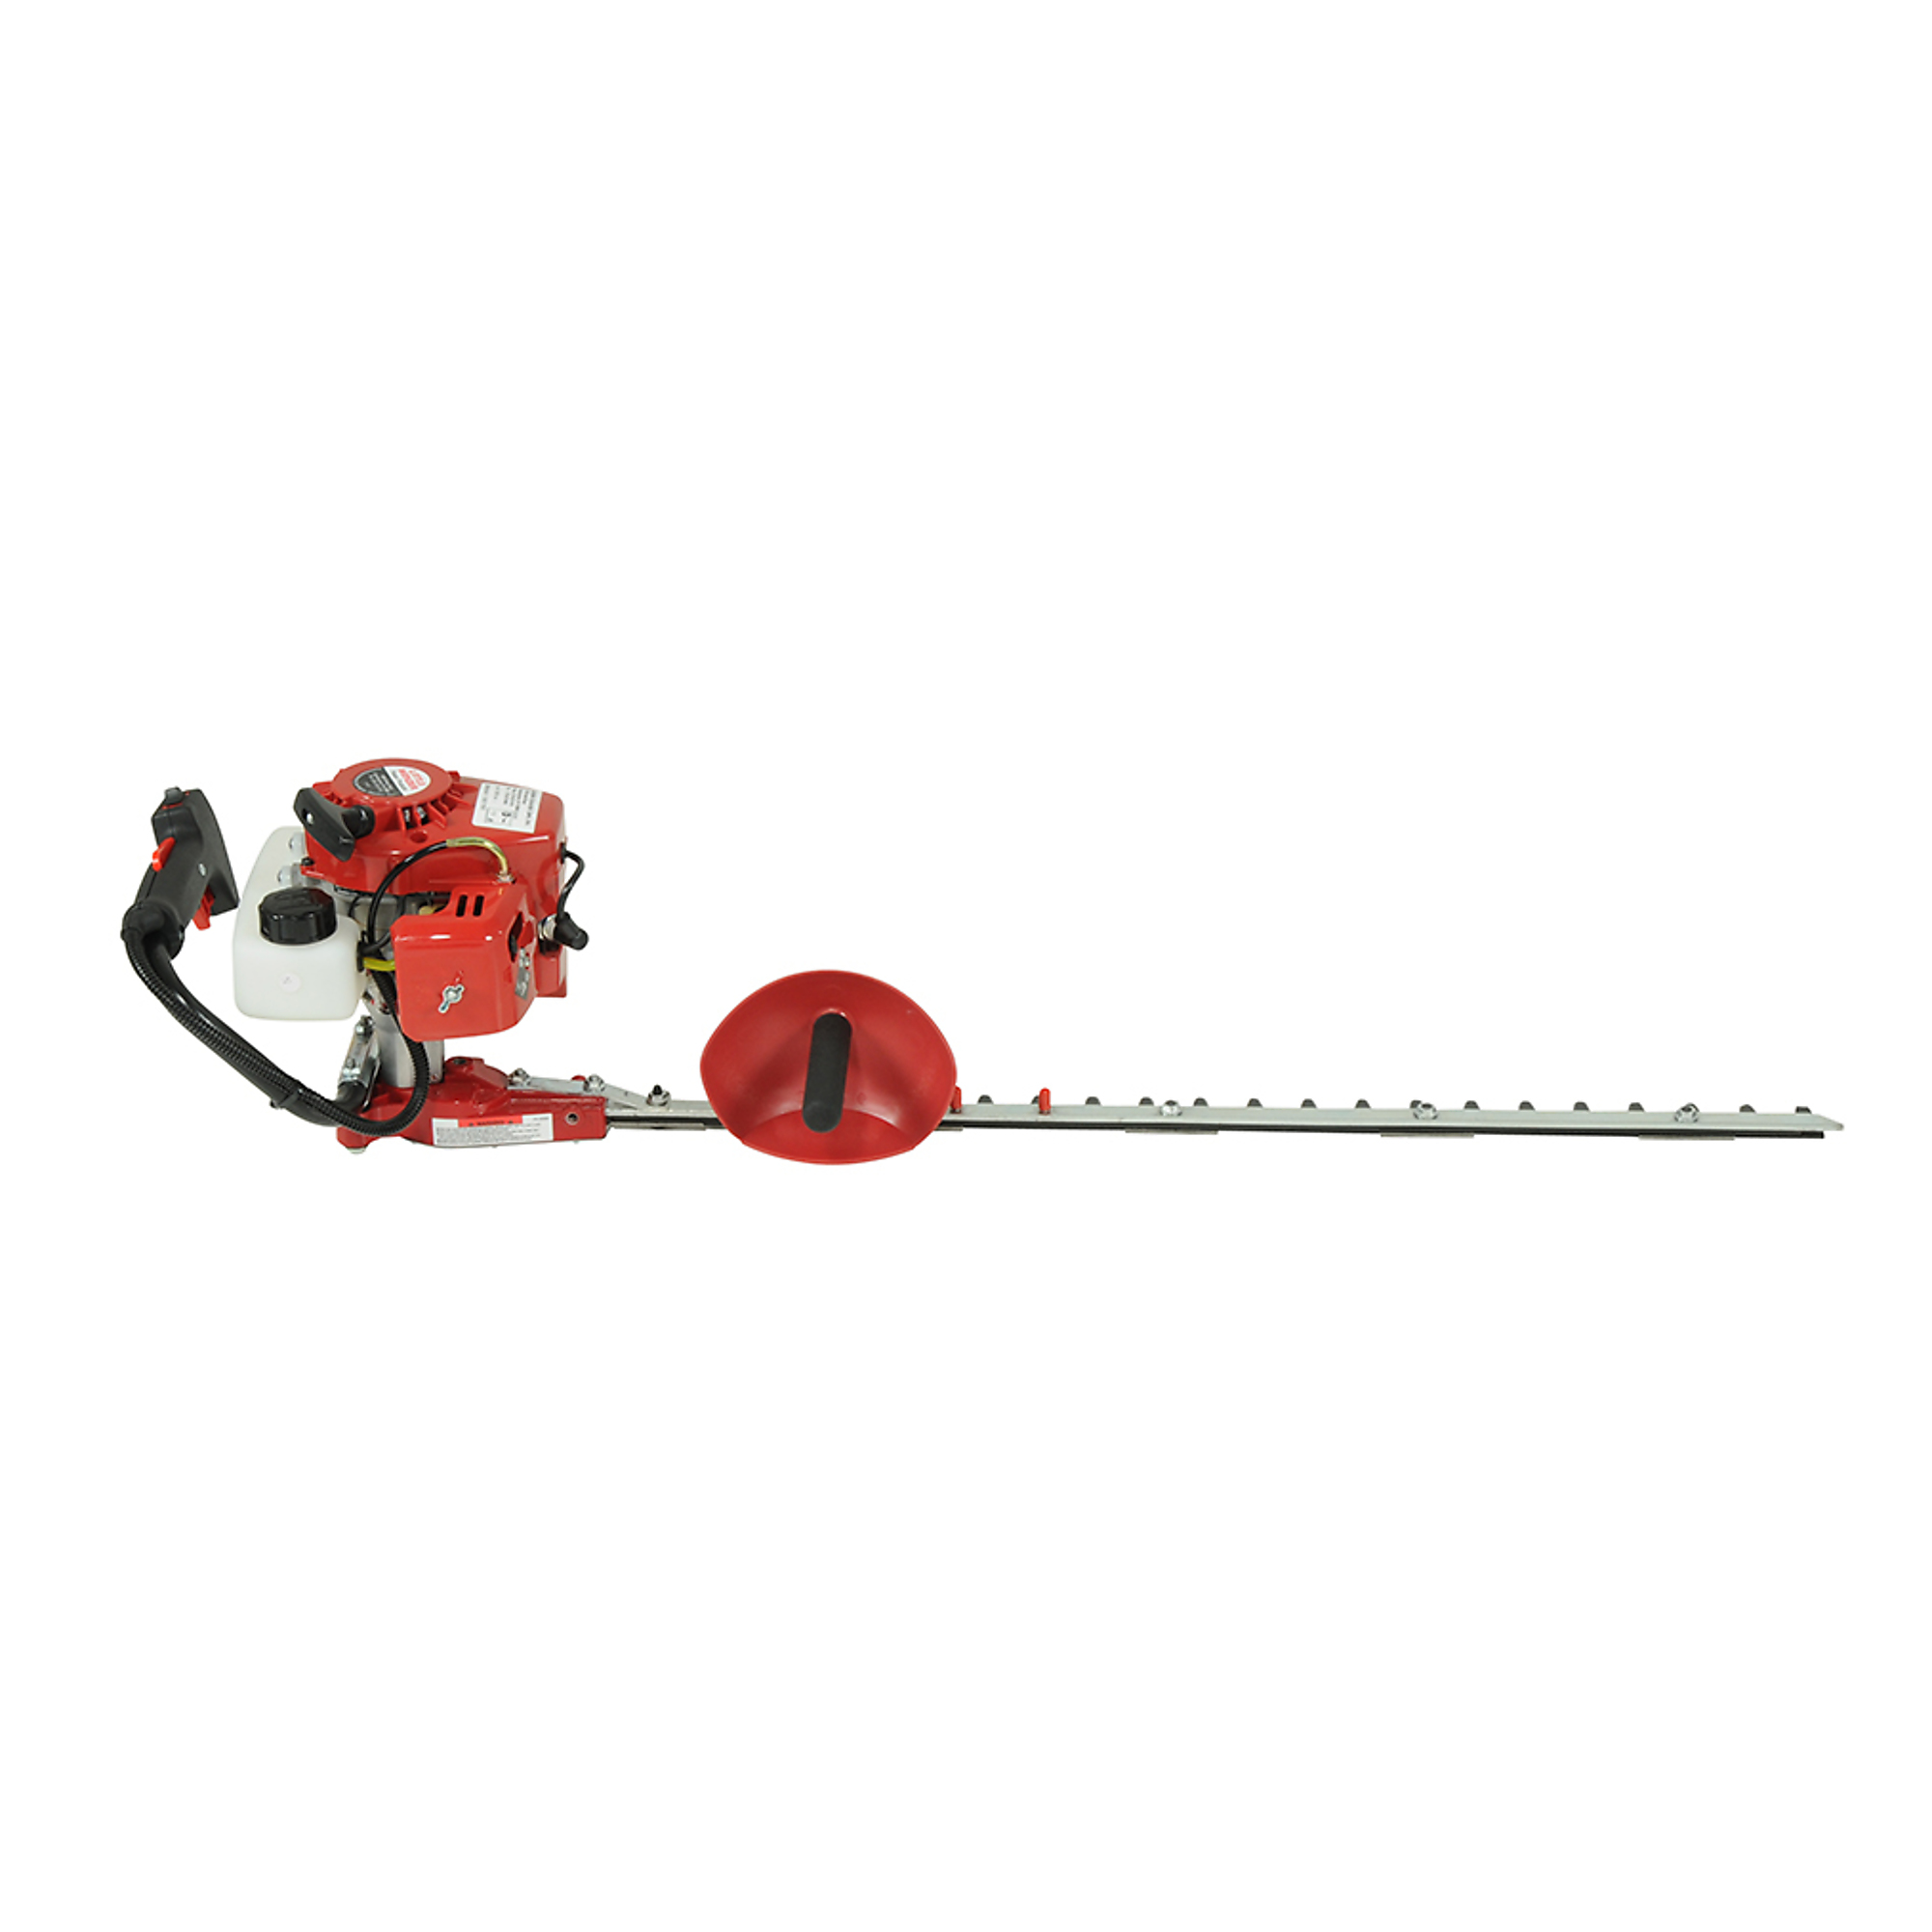 Little Wonder, 30Inch Single Blade Gas Hedge Trimmer, Engine Displacement 21 cc, Blade Length 30 in, Model 2230S-00-01